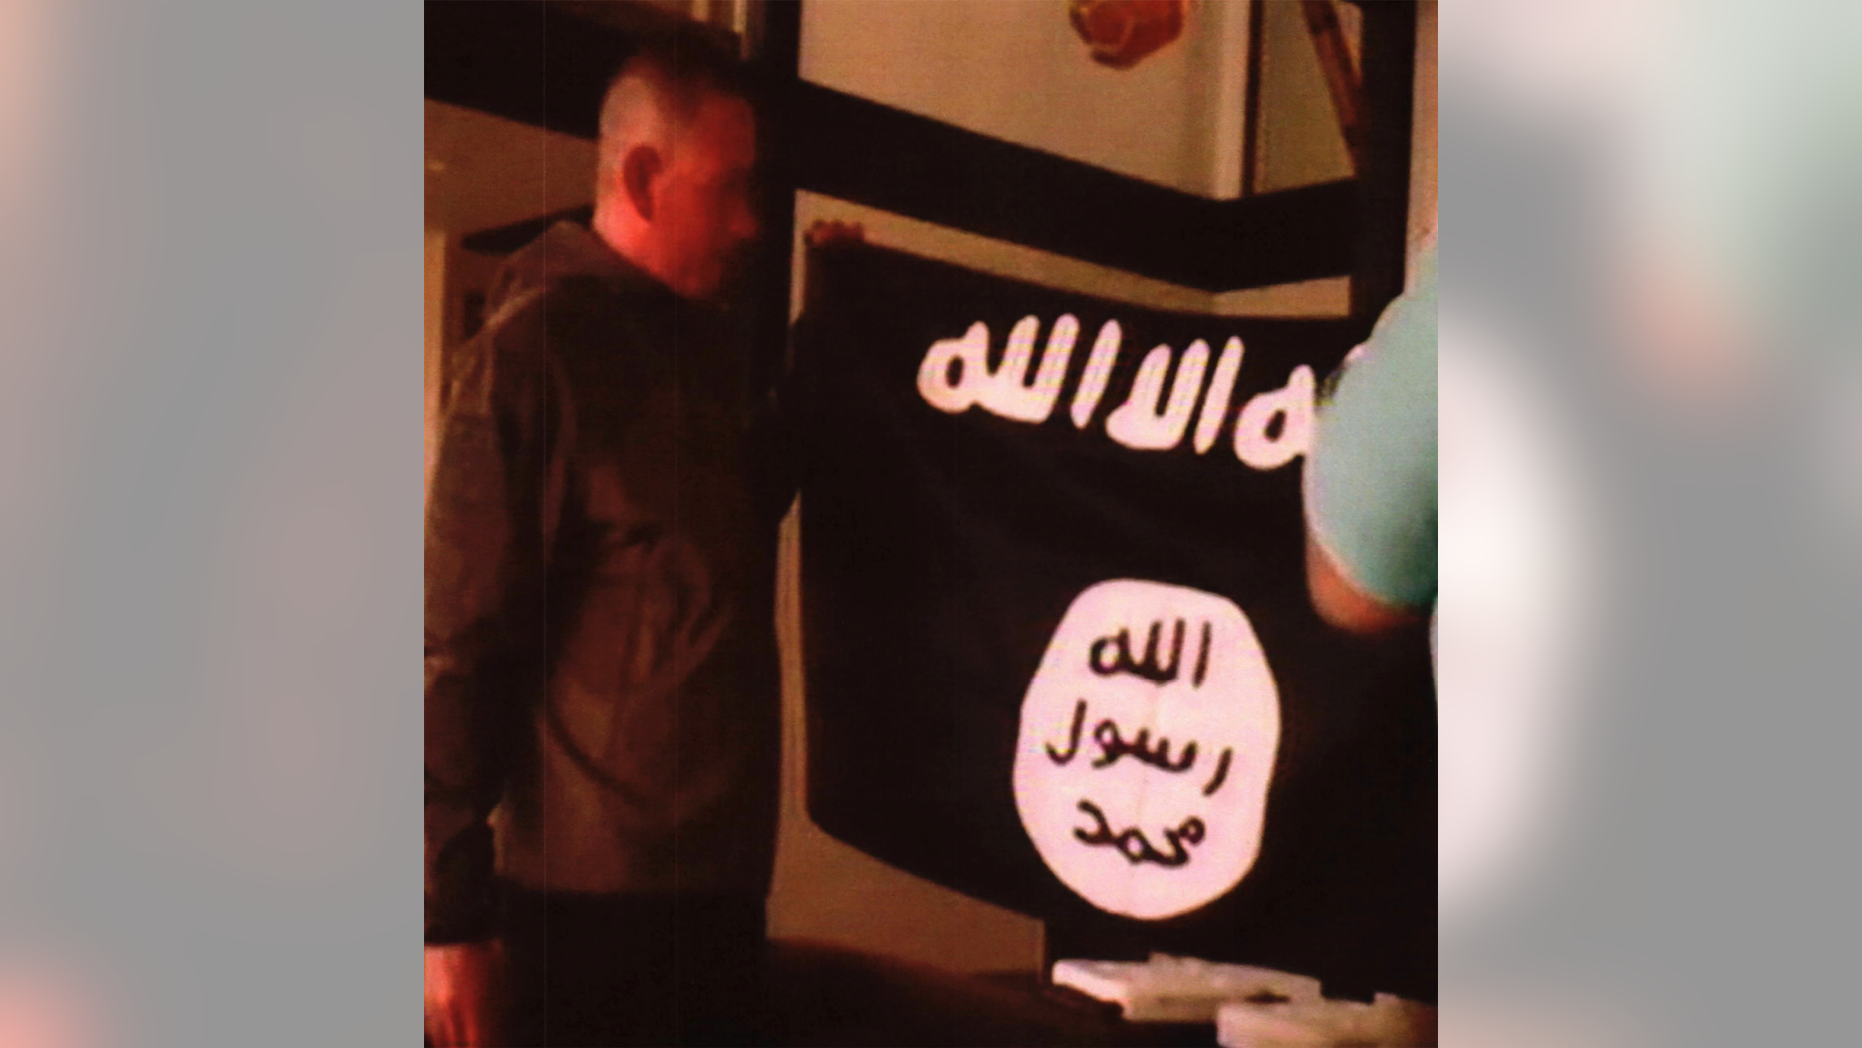 FILE - In this undated file image taken from FBI video and provided by the U.S. Attorney's Office in Hawaii on Thursday, July 13, 2017, Army Sgt. 1st Class Ikaika Kang holds an Islamic State group flag after allegedly pledging allegiance to the group at a house in Honolulu. On Tuesday, Dec. 4, 2018, Kang is scheduled to be sentenced for trying to help the Islamic State group. (FBI/U.S Attorney's Office, District of Hawaii via AP, File)